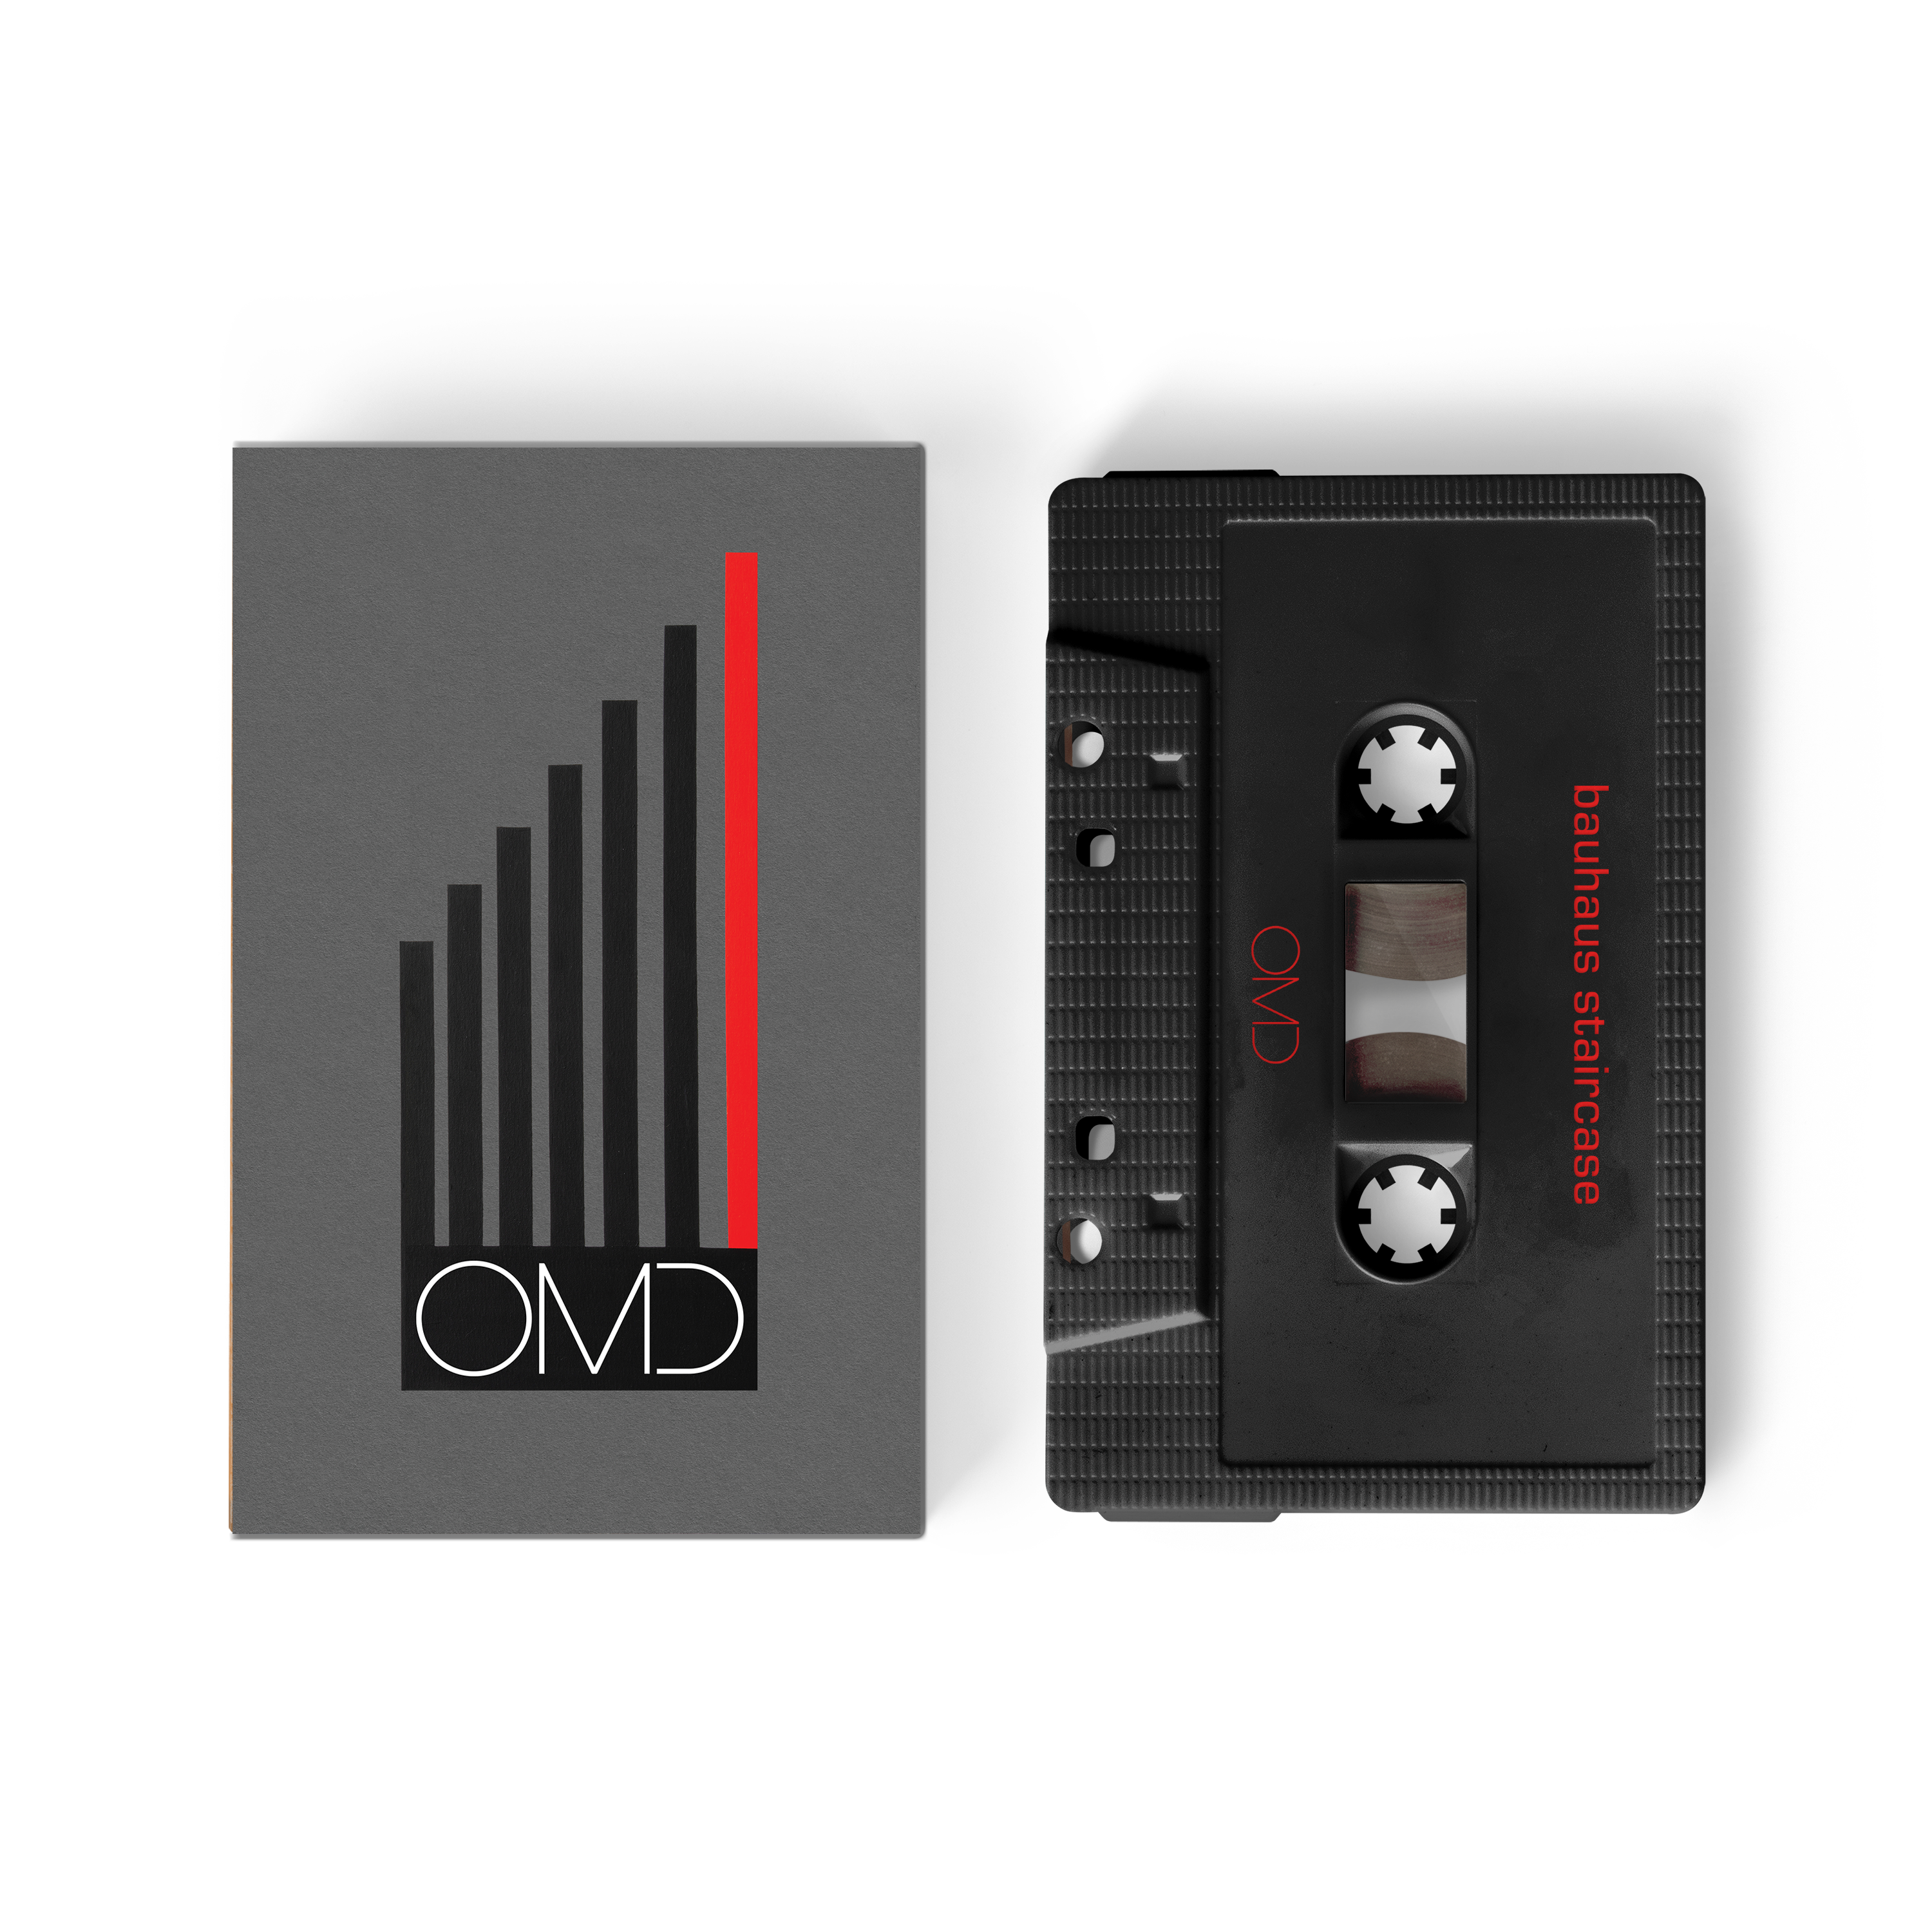 OMD - Bauhaus Staircase: Limited Edition Cassette